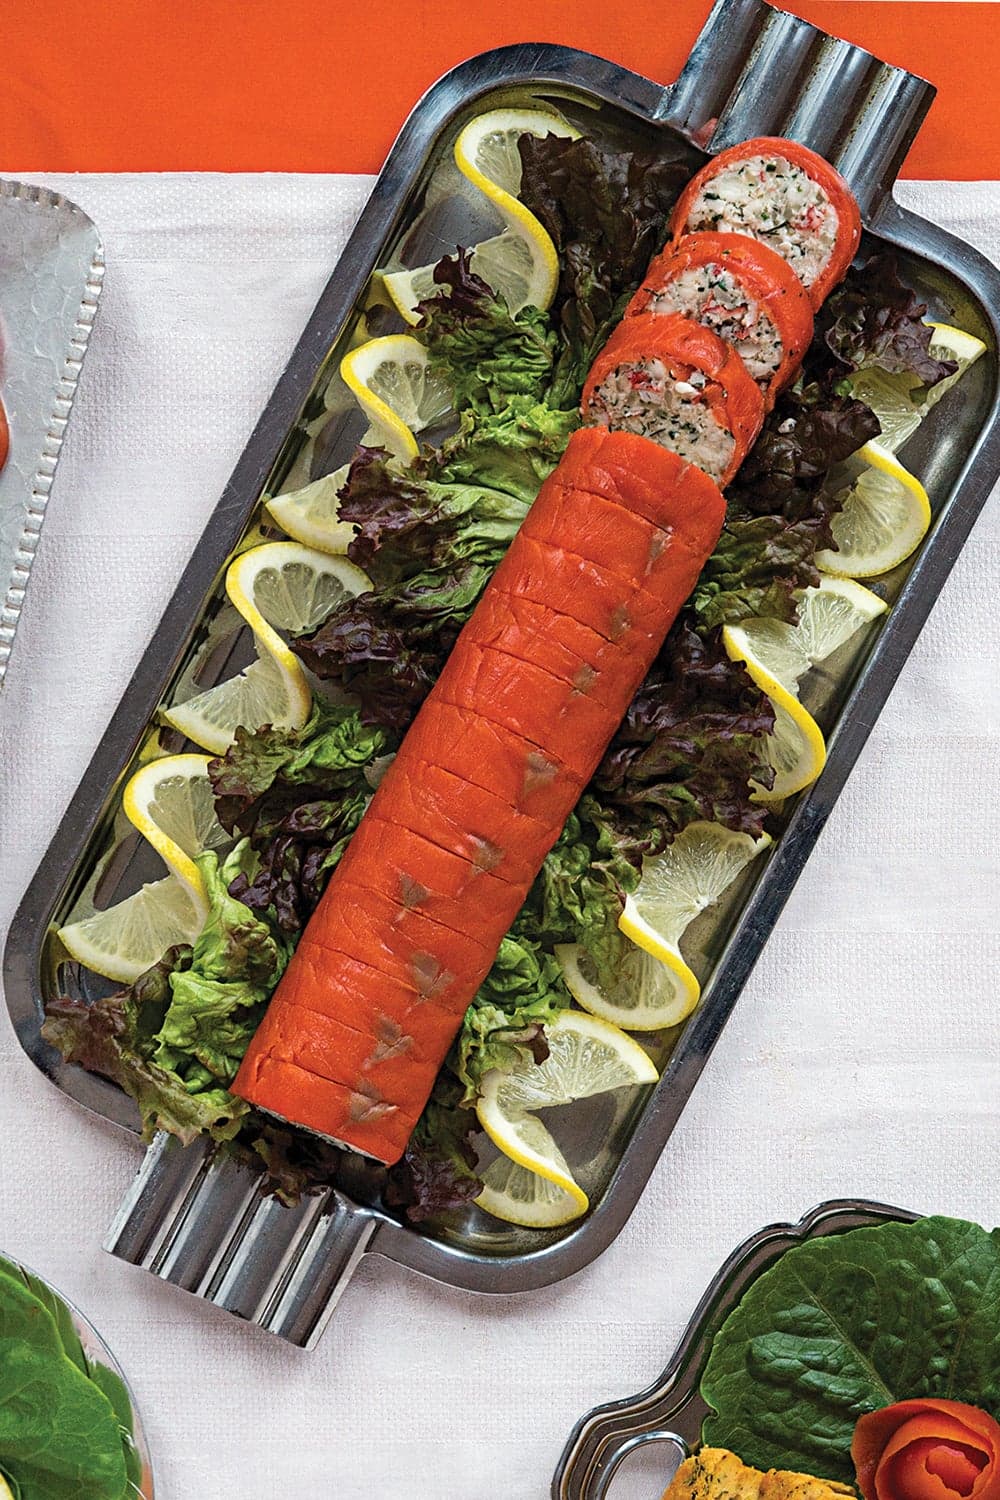 Smoked Salmon Stuffed with Cottage Cheese and Crab